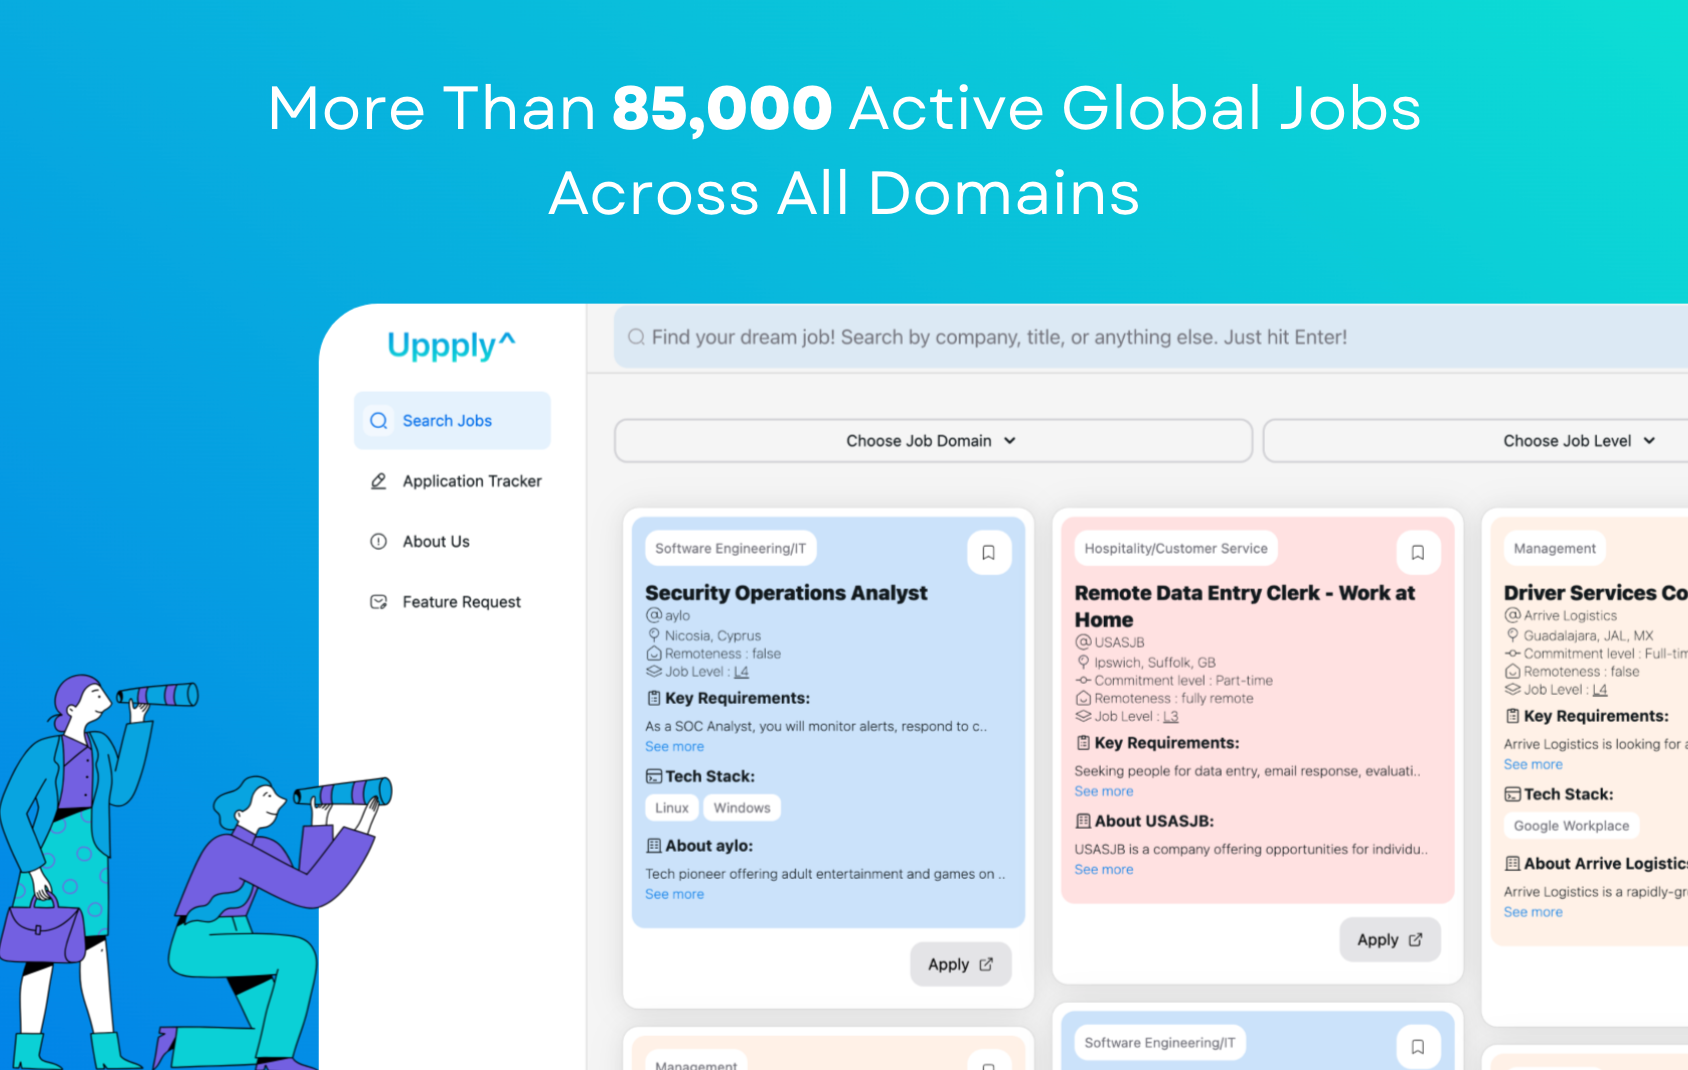 uppply - Using AI to make opportunities more accessible